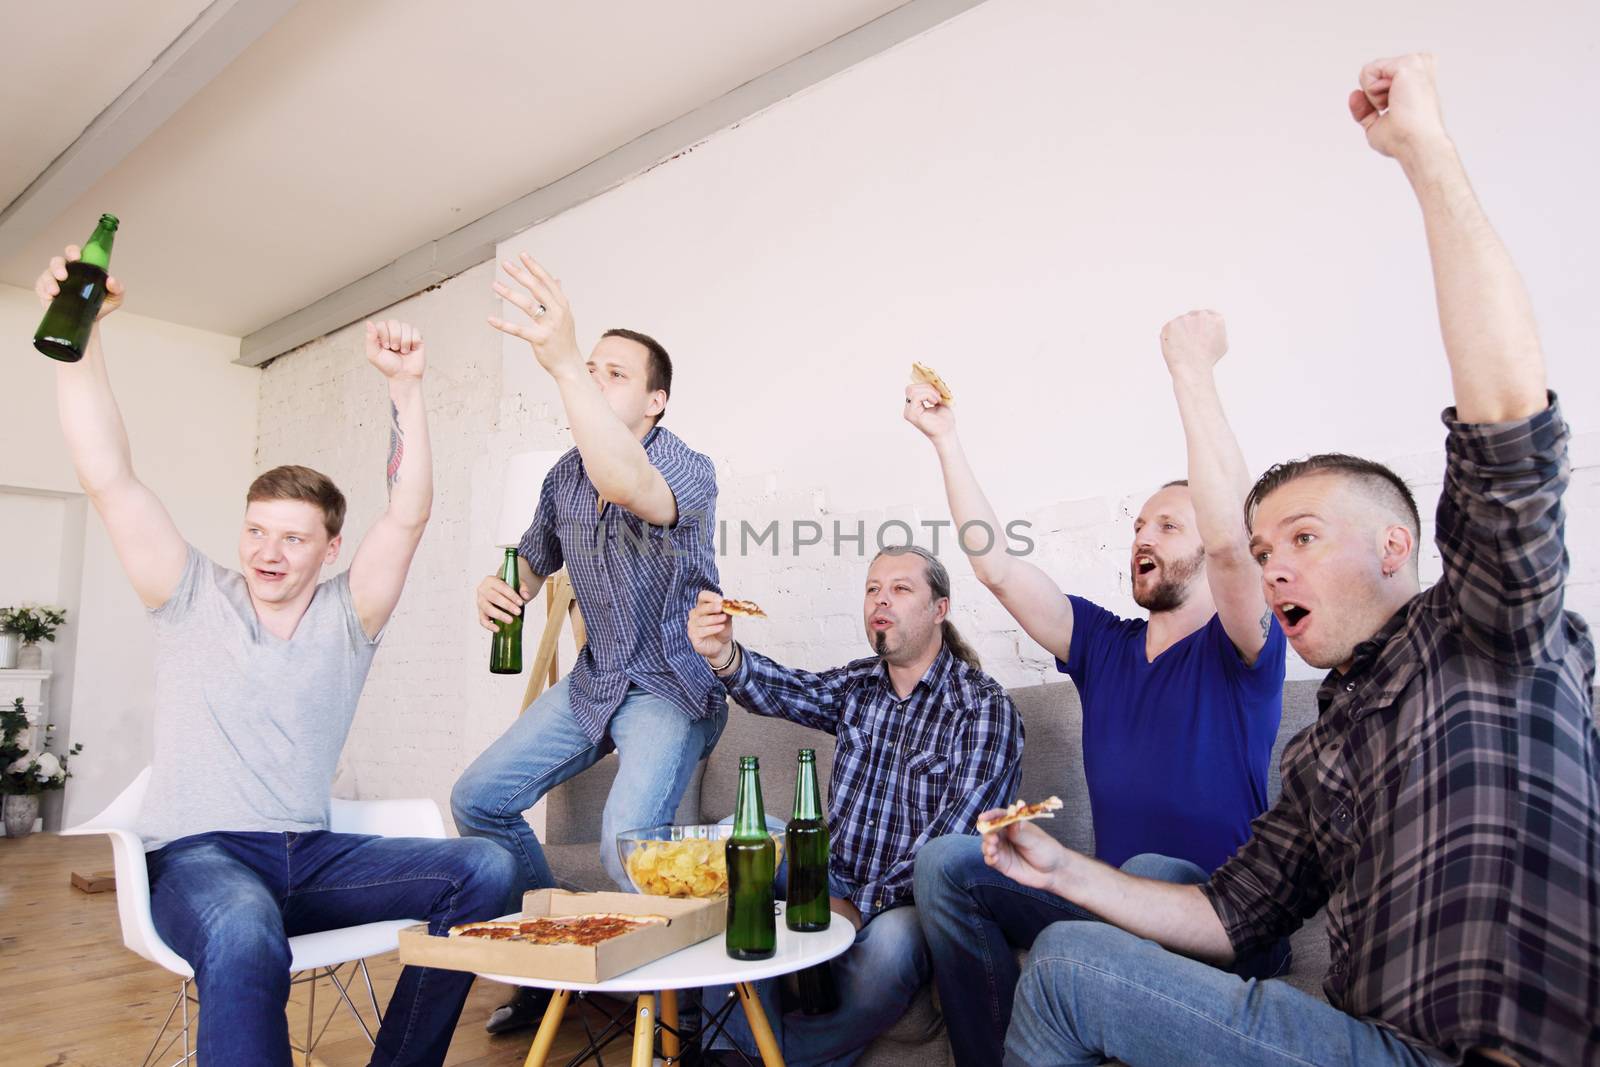 Male friends sports fans watching winning football match on TV at home celebrating winning goal huddled on couch shouting excited sharing snacks drinking beer